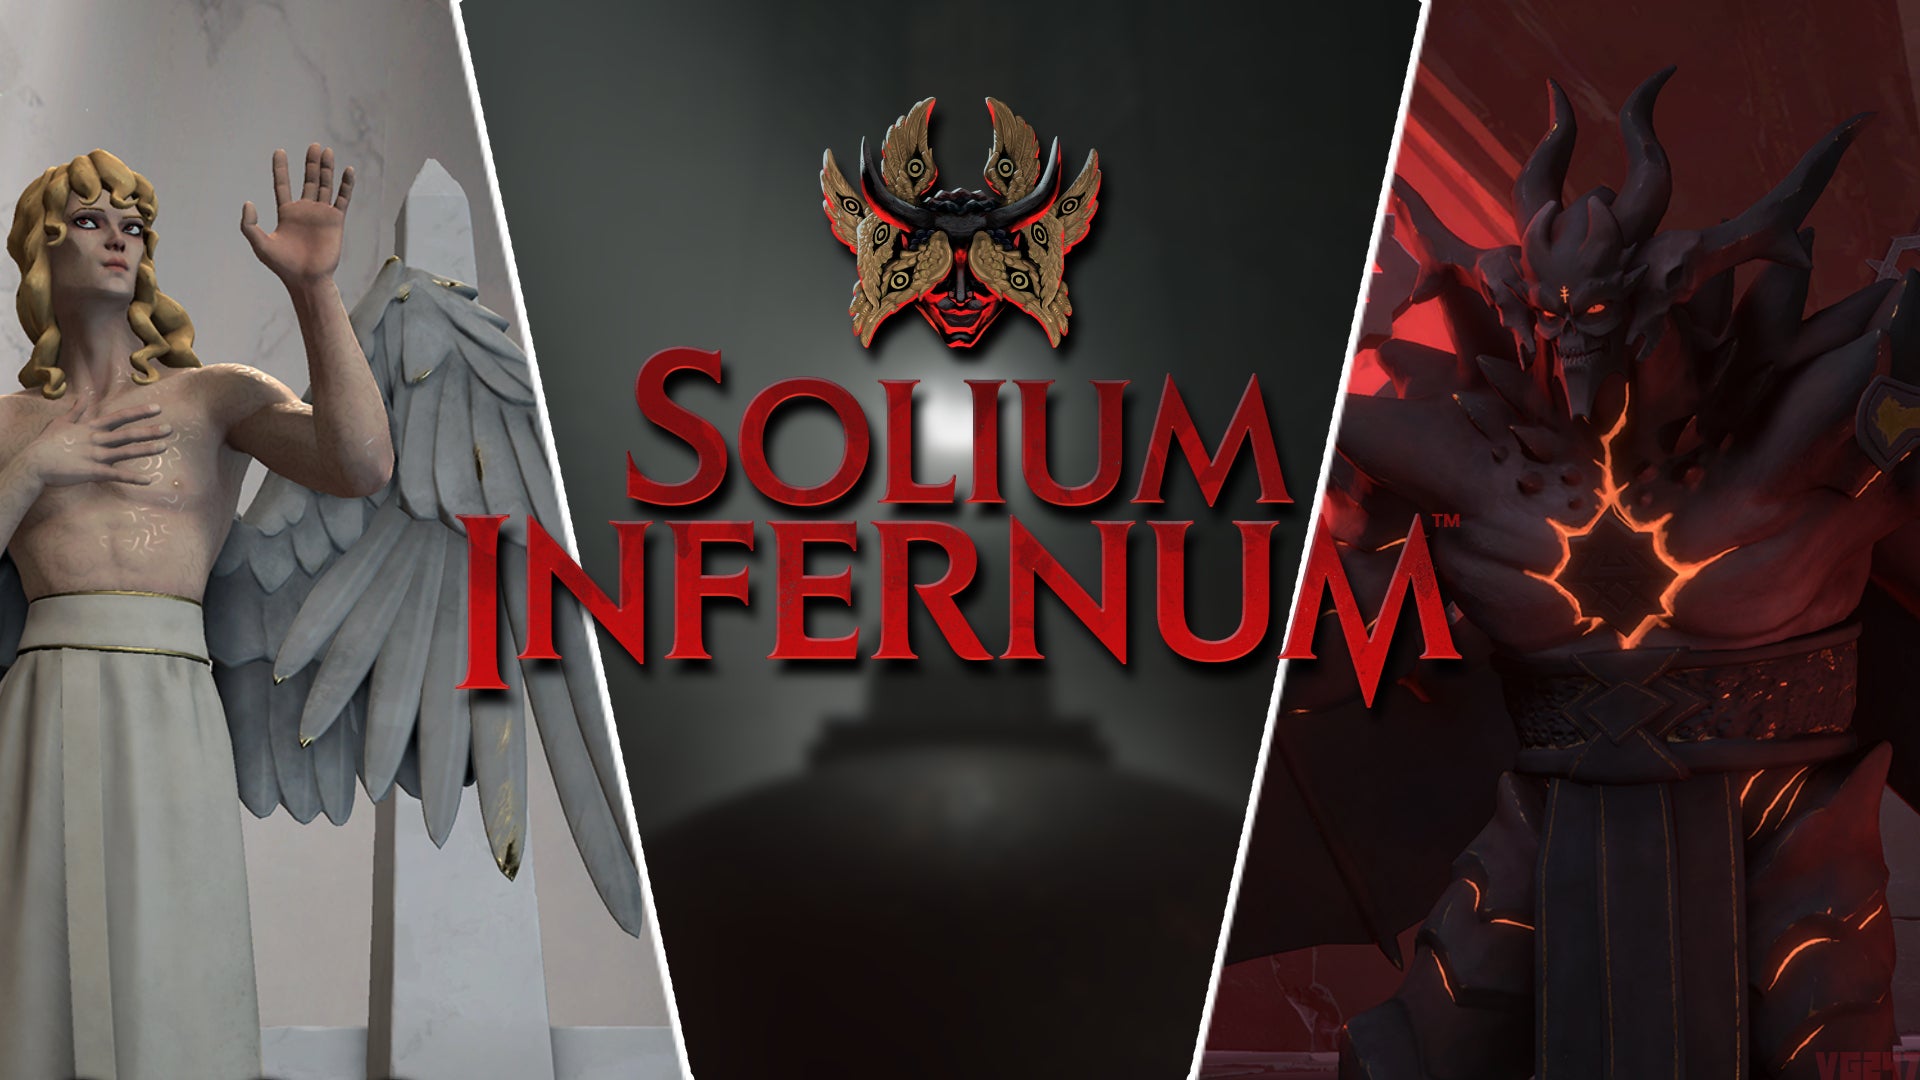 Solium Infernum returns from Hell as League of Geeks announces new title for 2023 release date